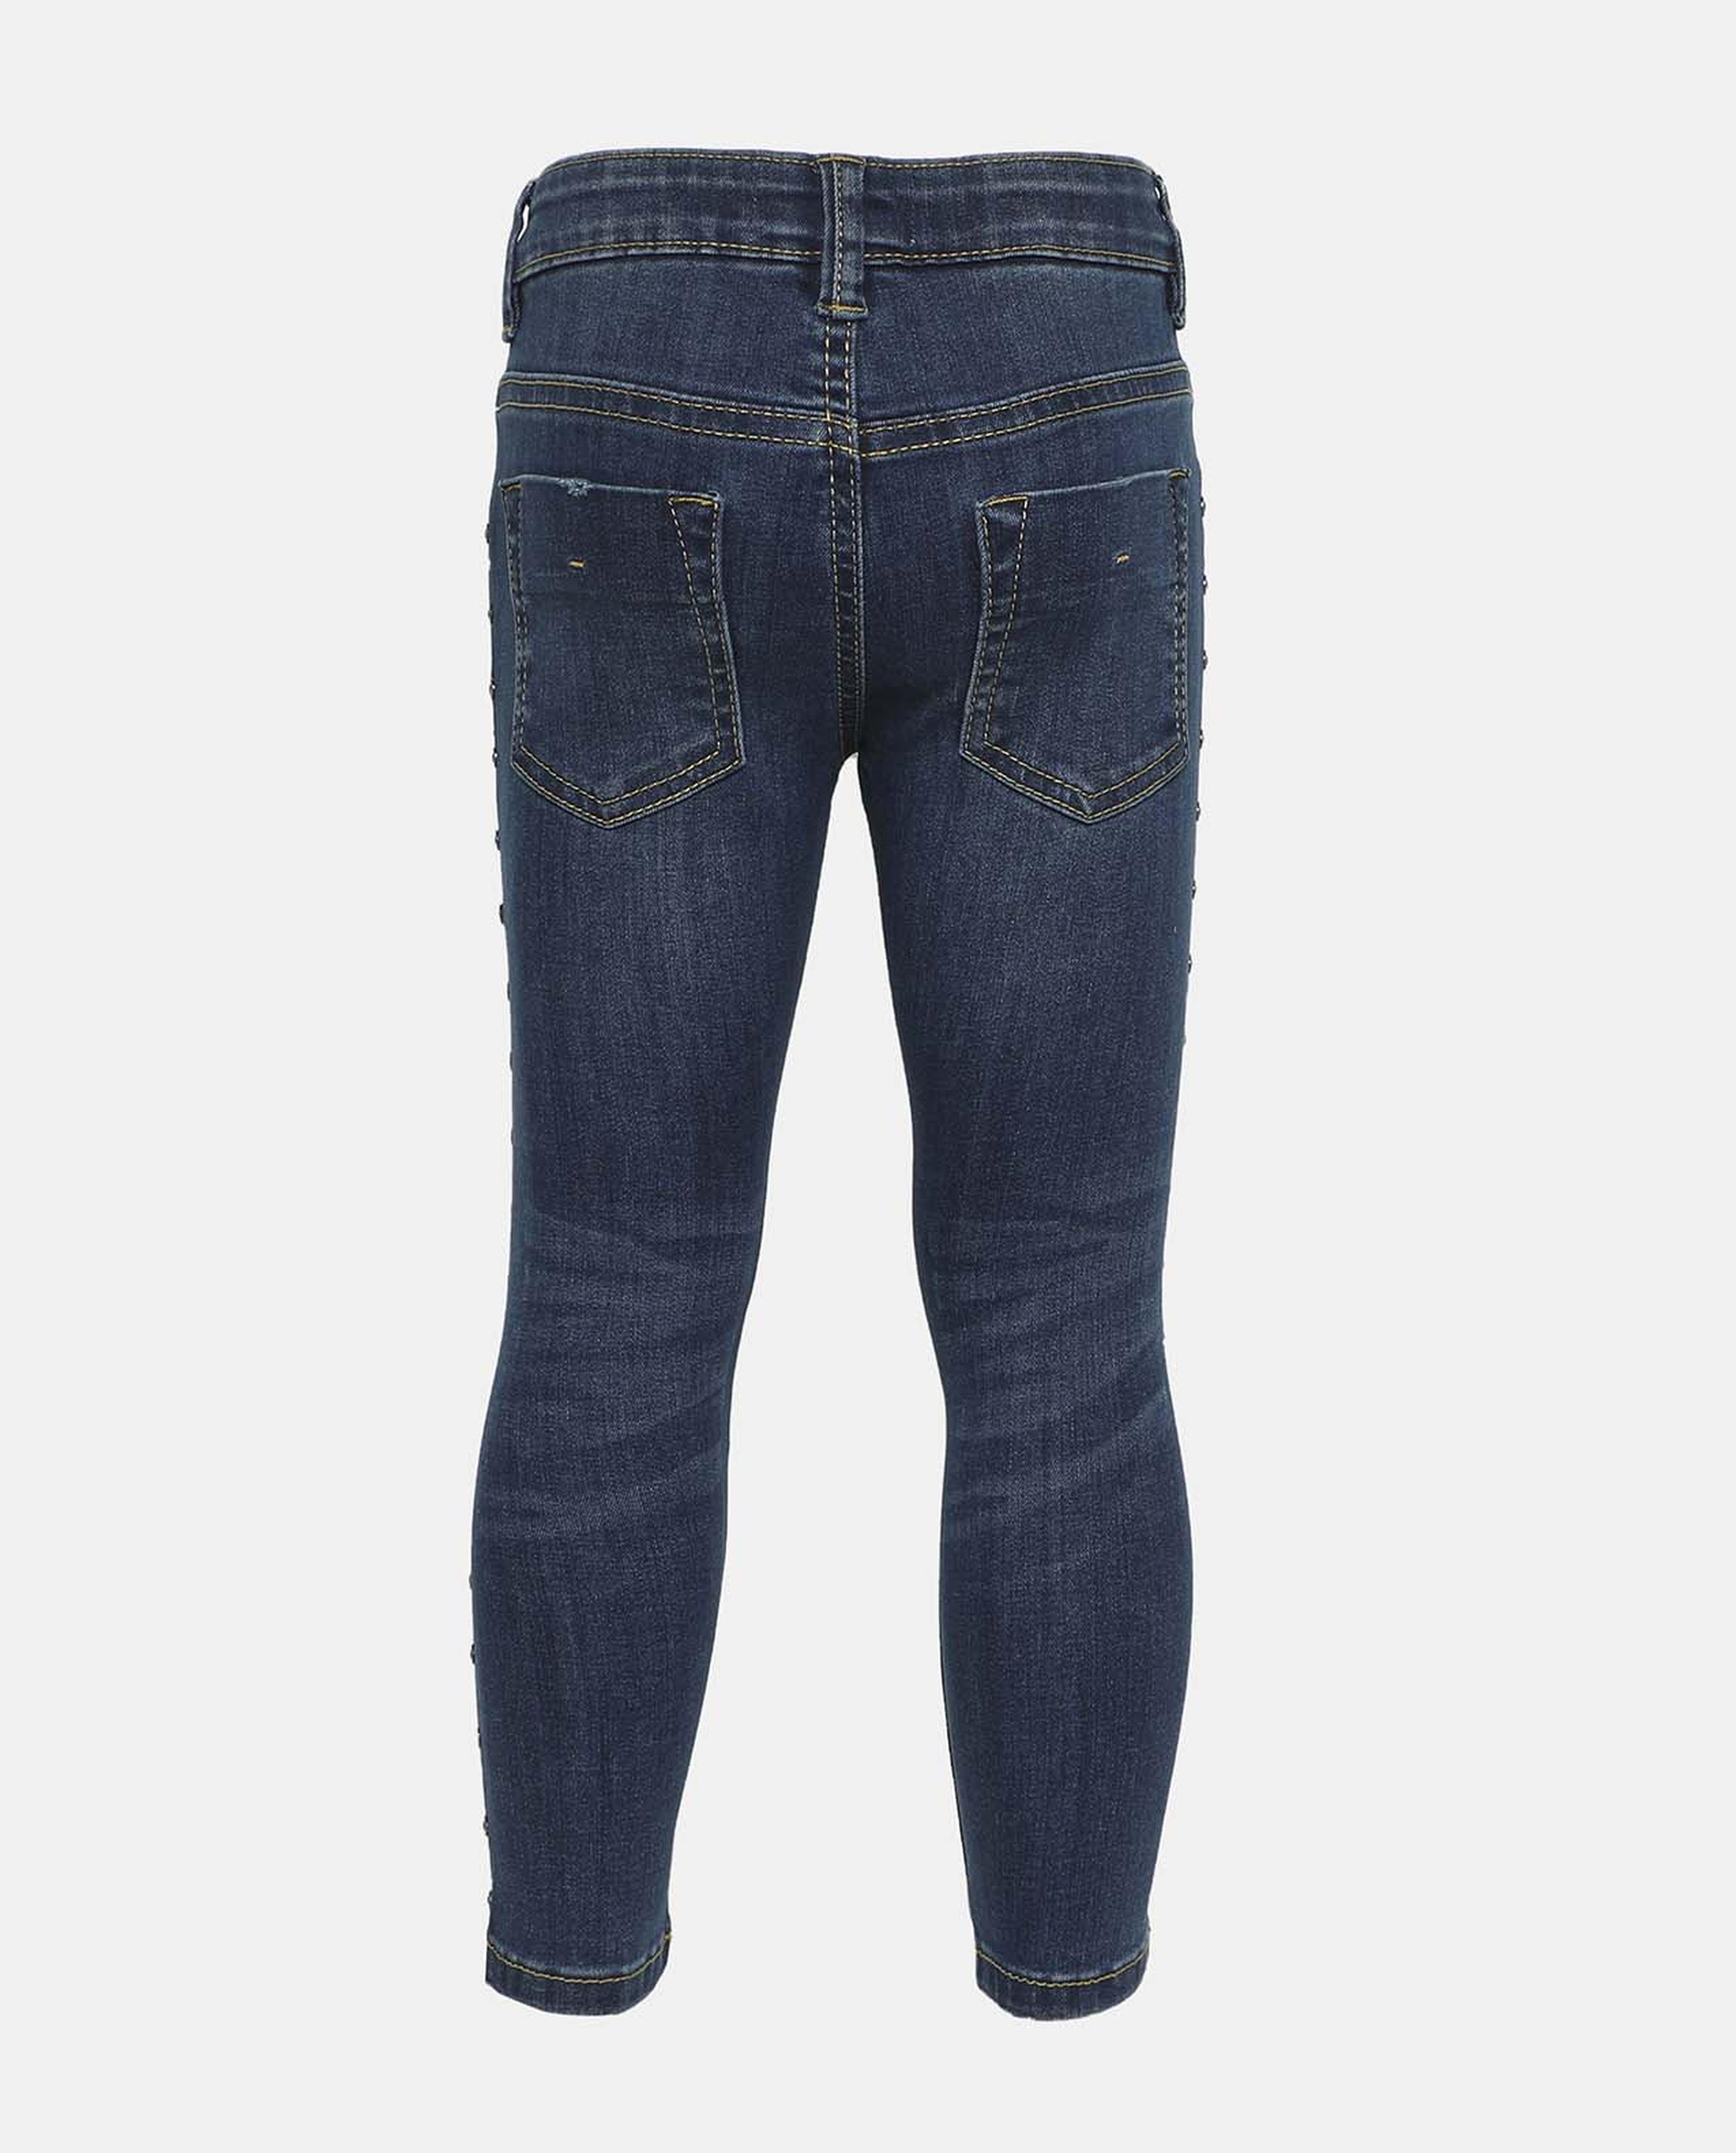 Blue Patterned Straight Jeans